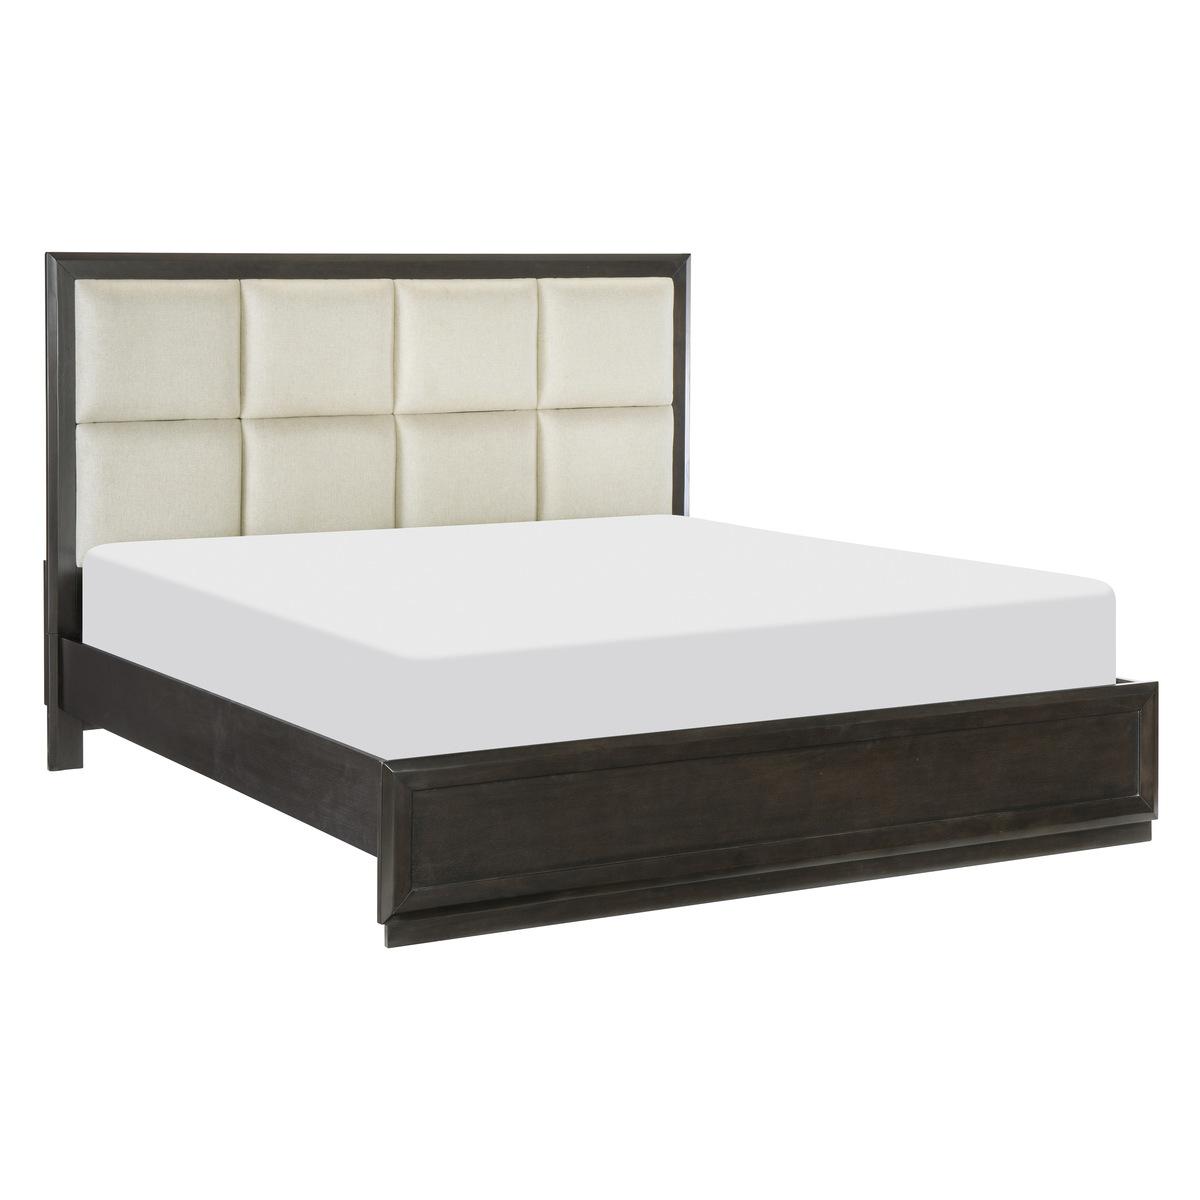 Transitional Bed 1575-1* Hodgin 1575-1* in Charcoal, Beige 